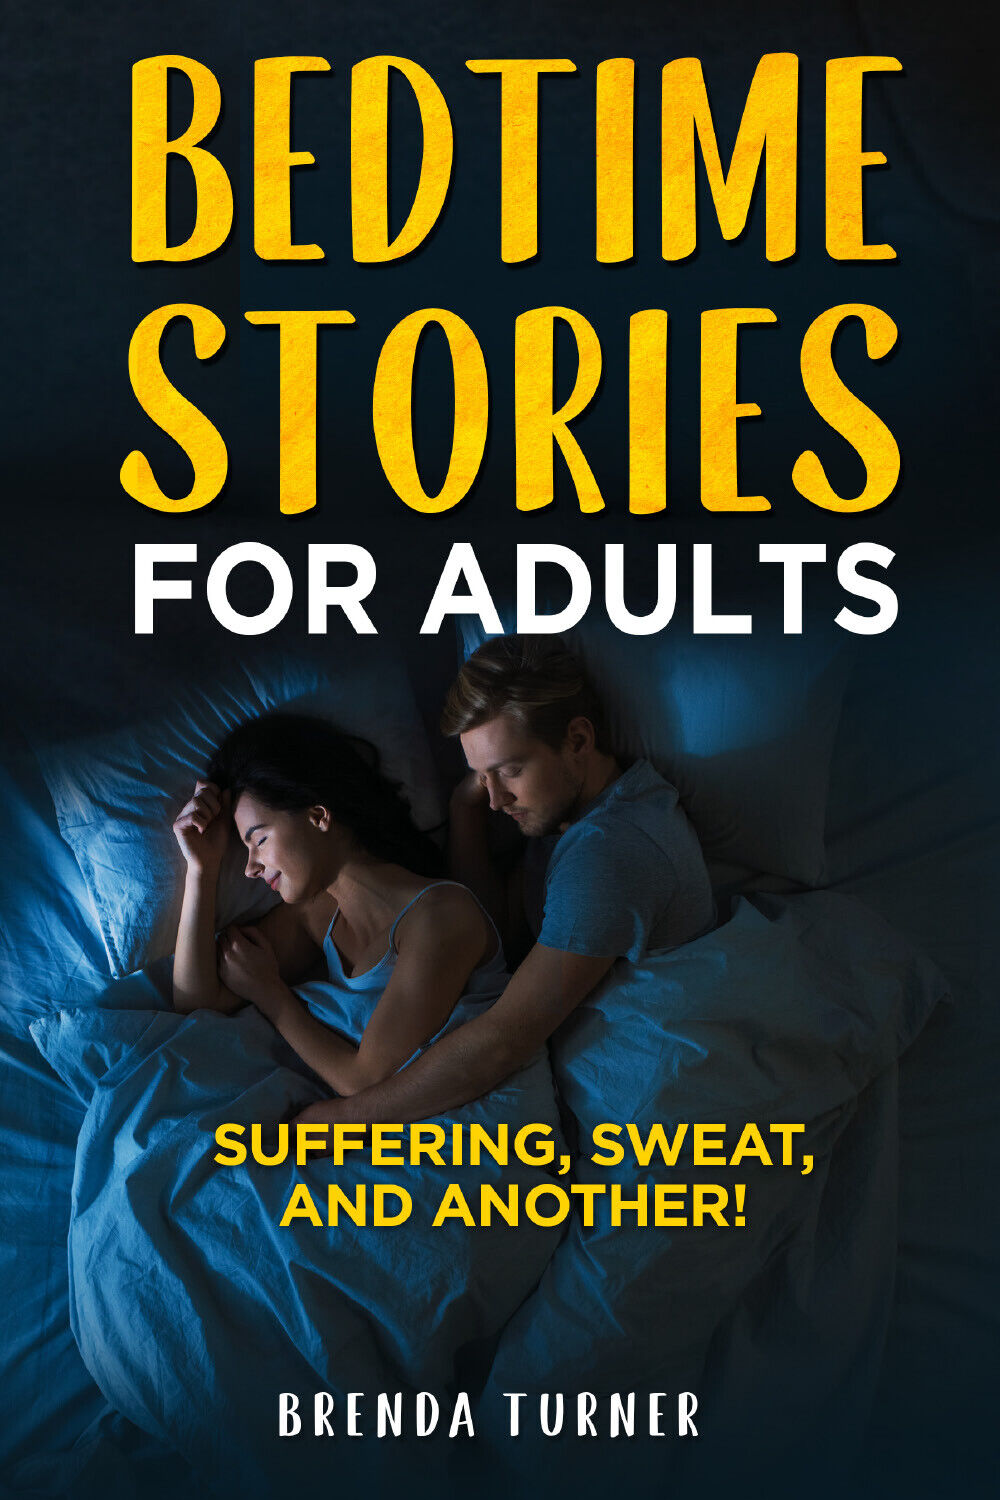 Bedtimes stories for adults. Suffering, Sweat, and another! di Brenda Turner,  2